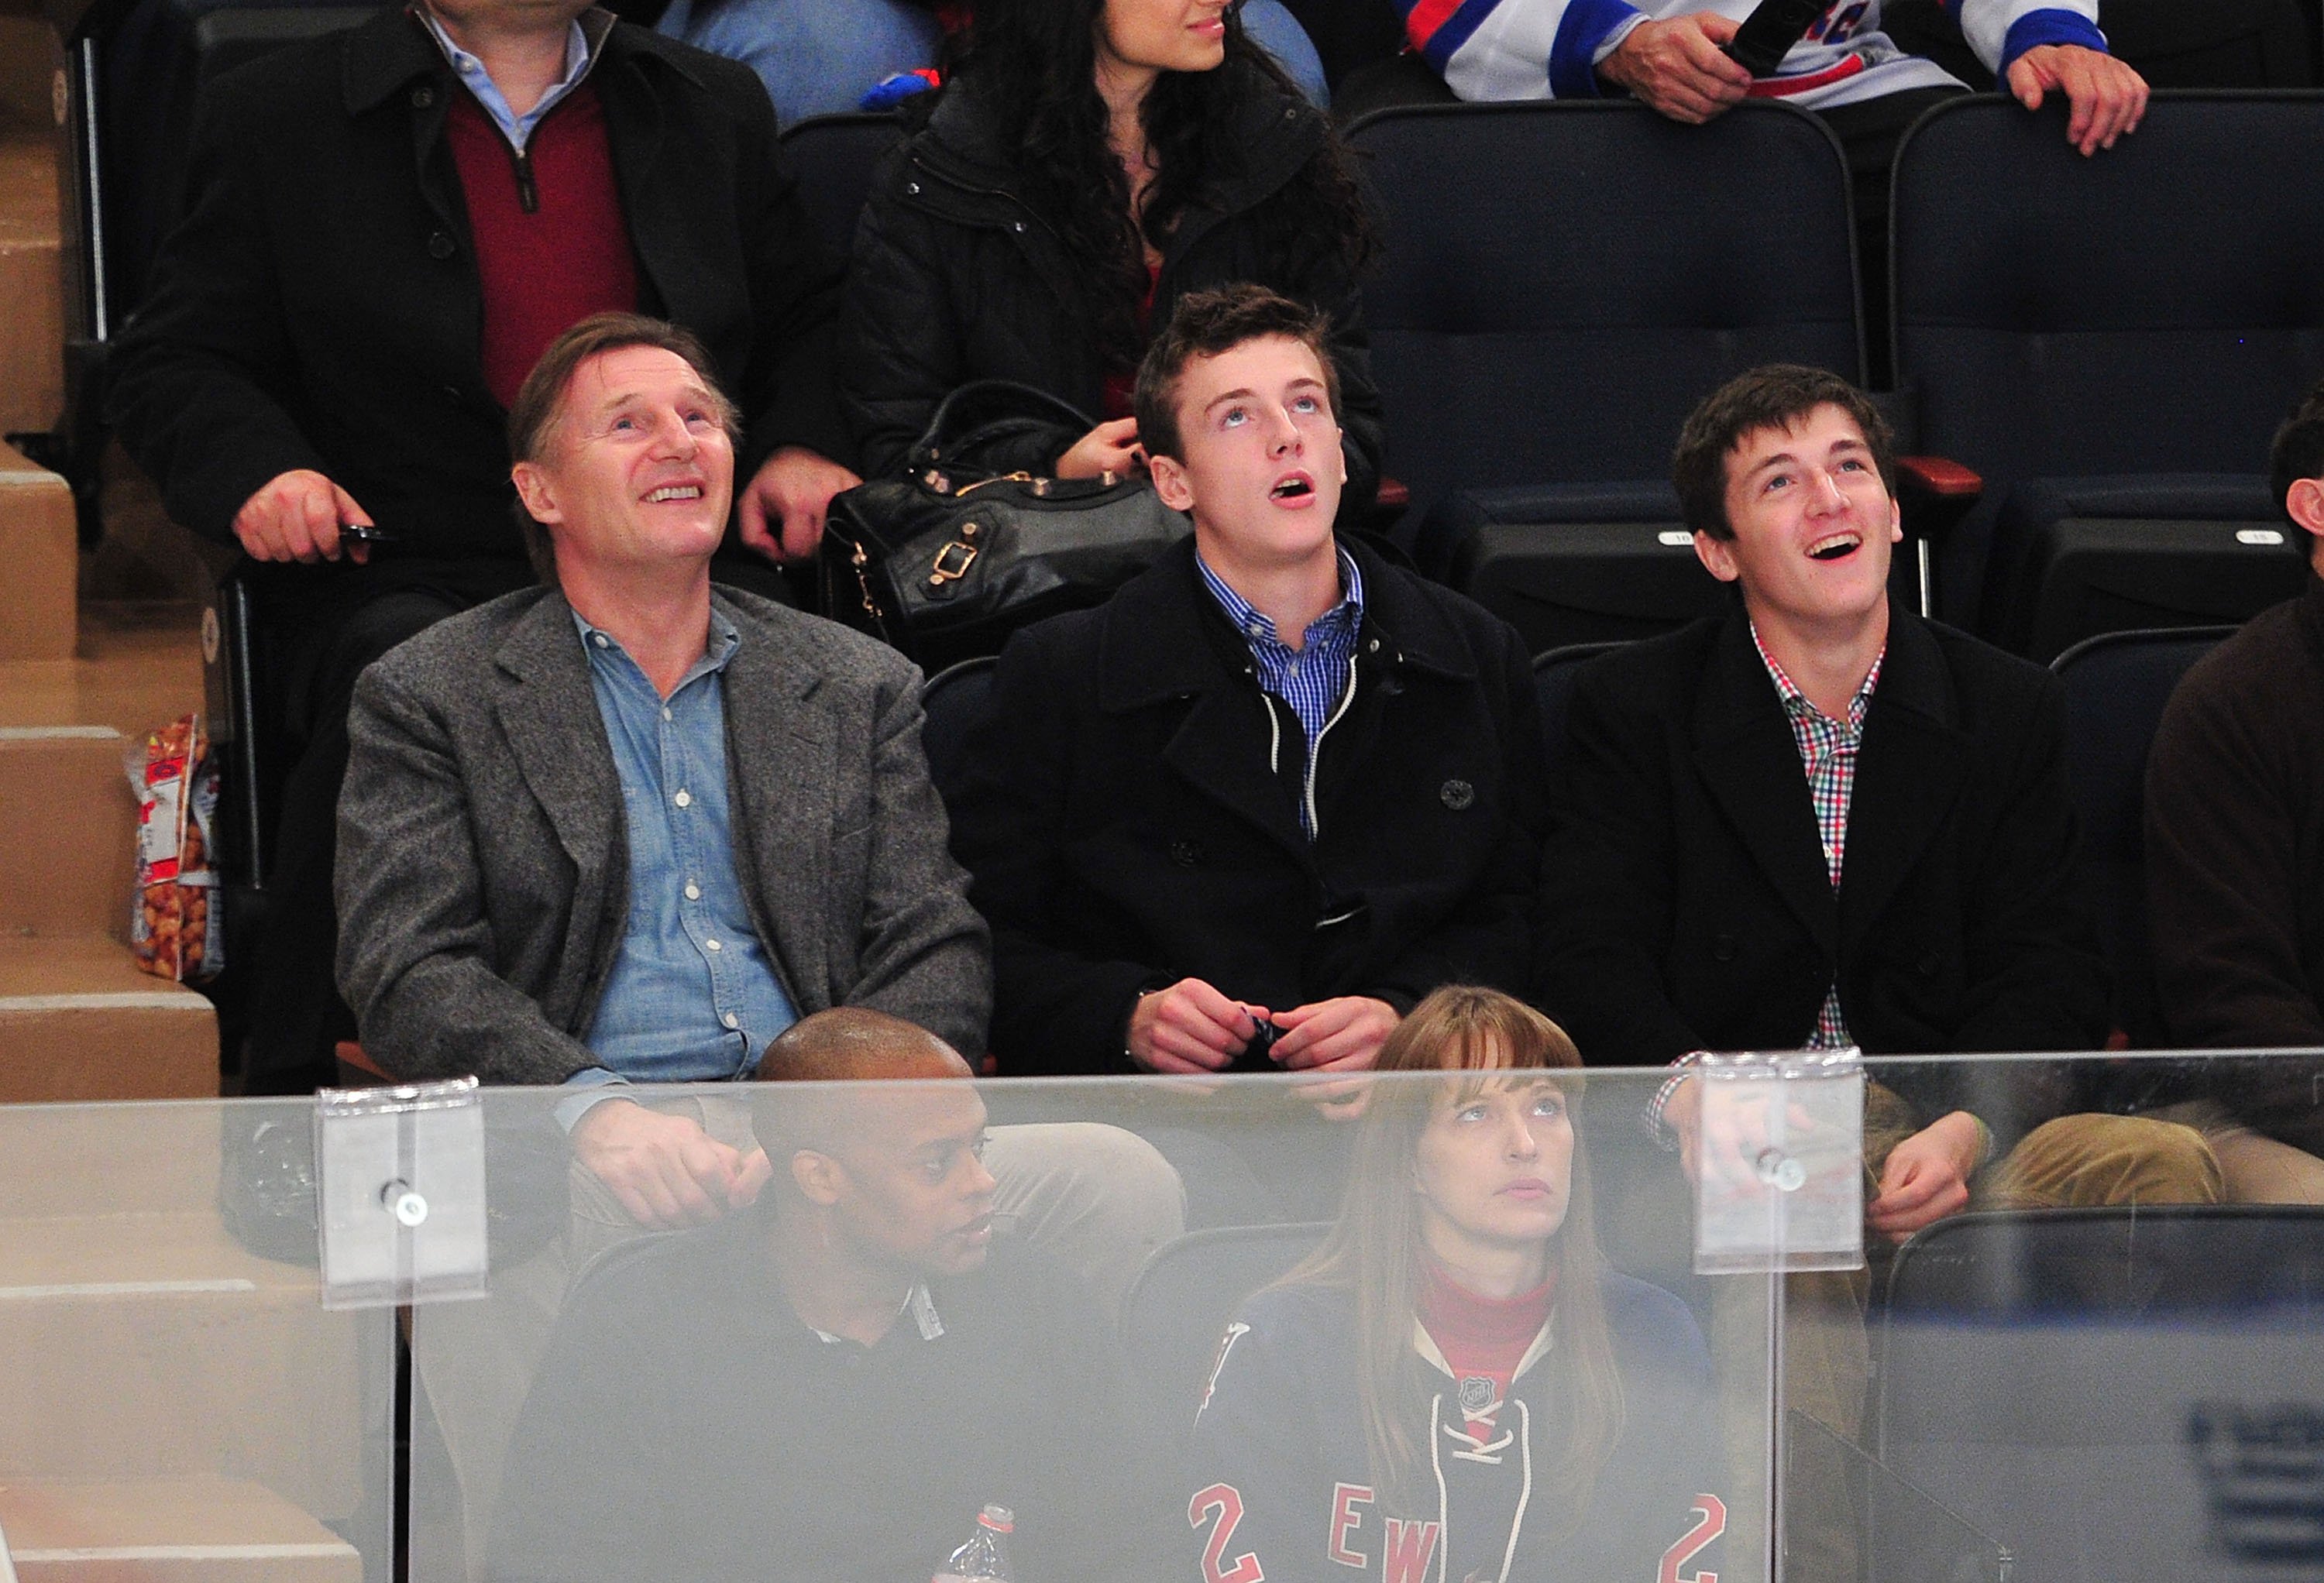 Liam Neeson and his son Michael and Daniel in New York in 2011 | Source: Getty Images 